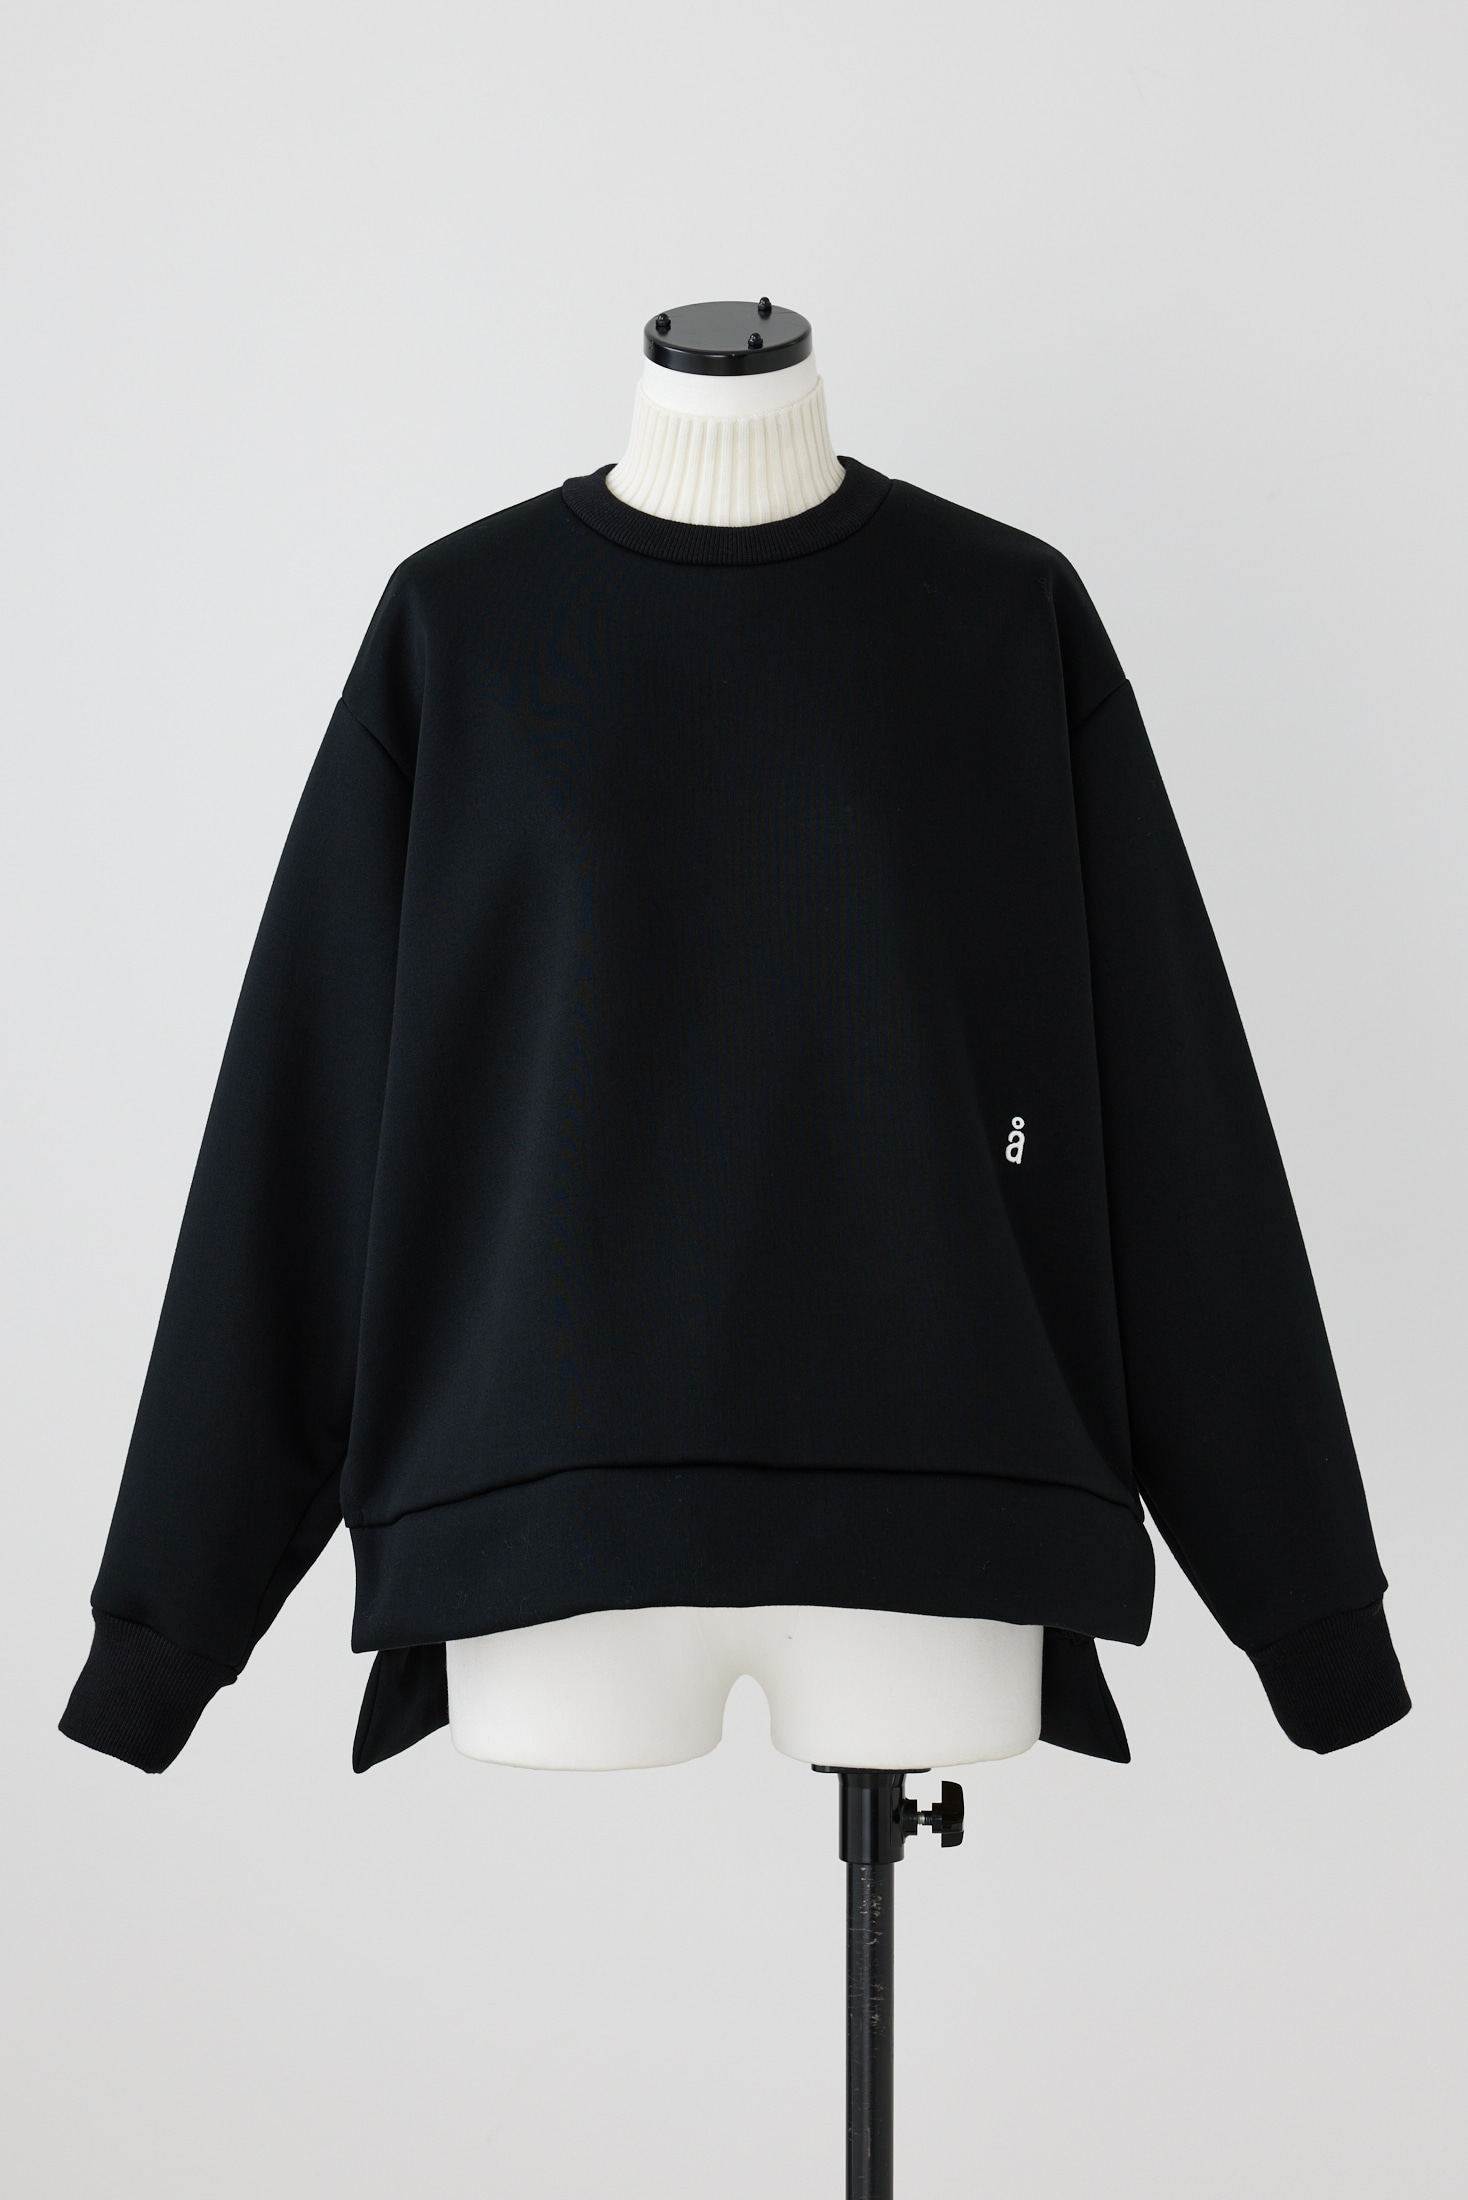 nagonstans layered-neck pullover